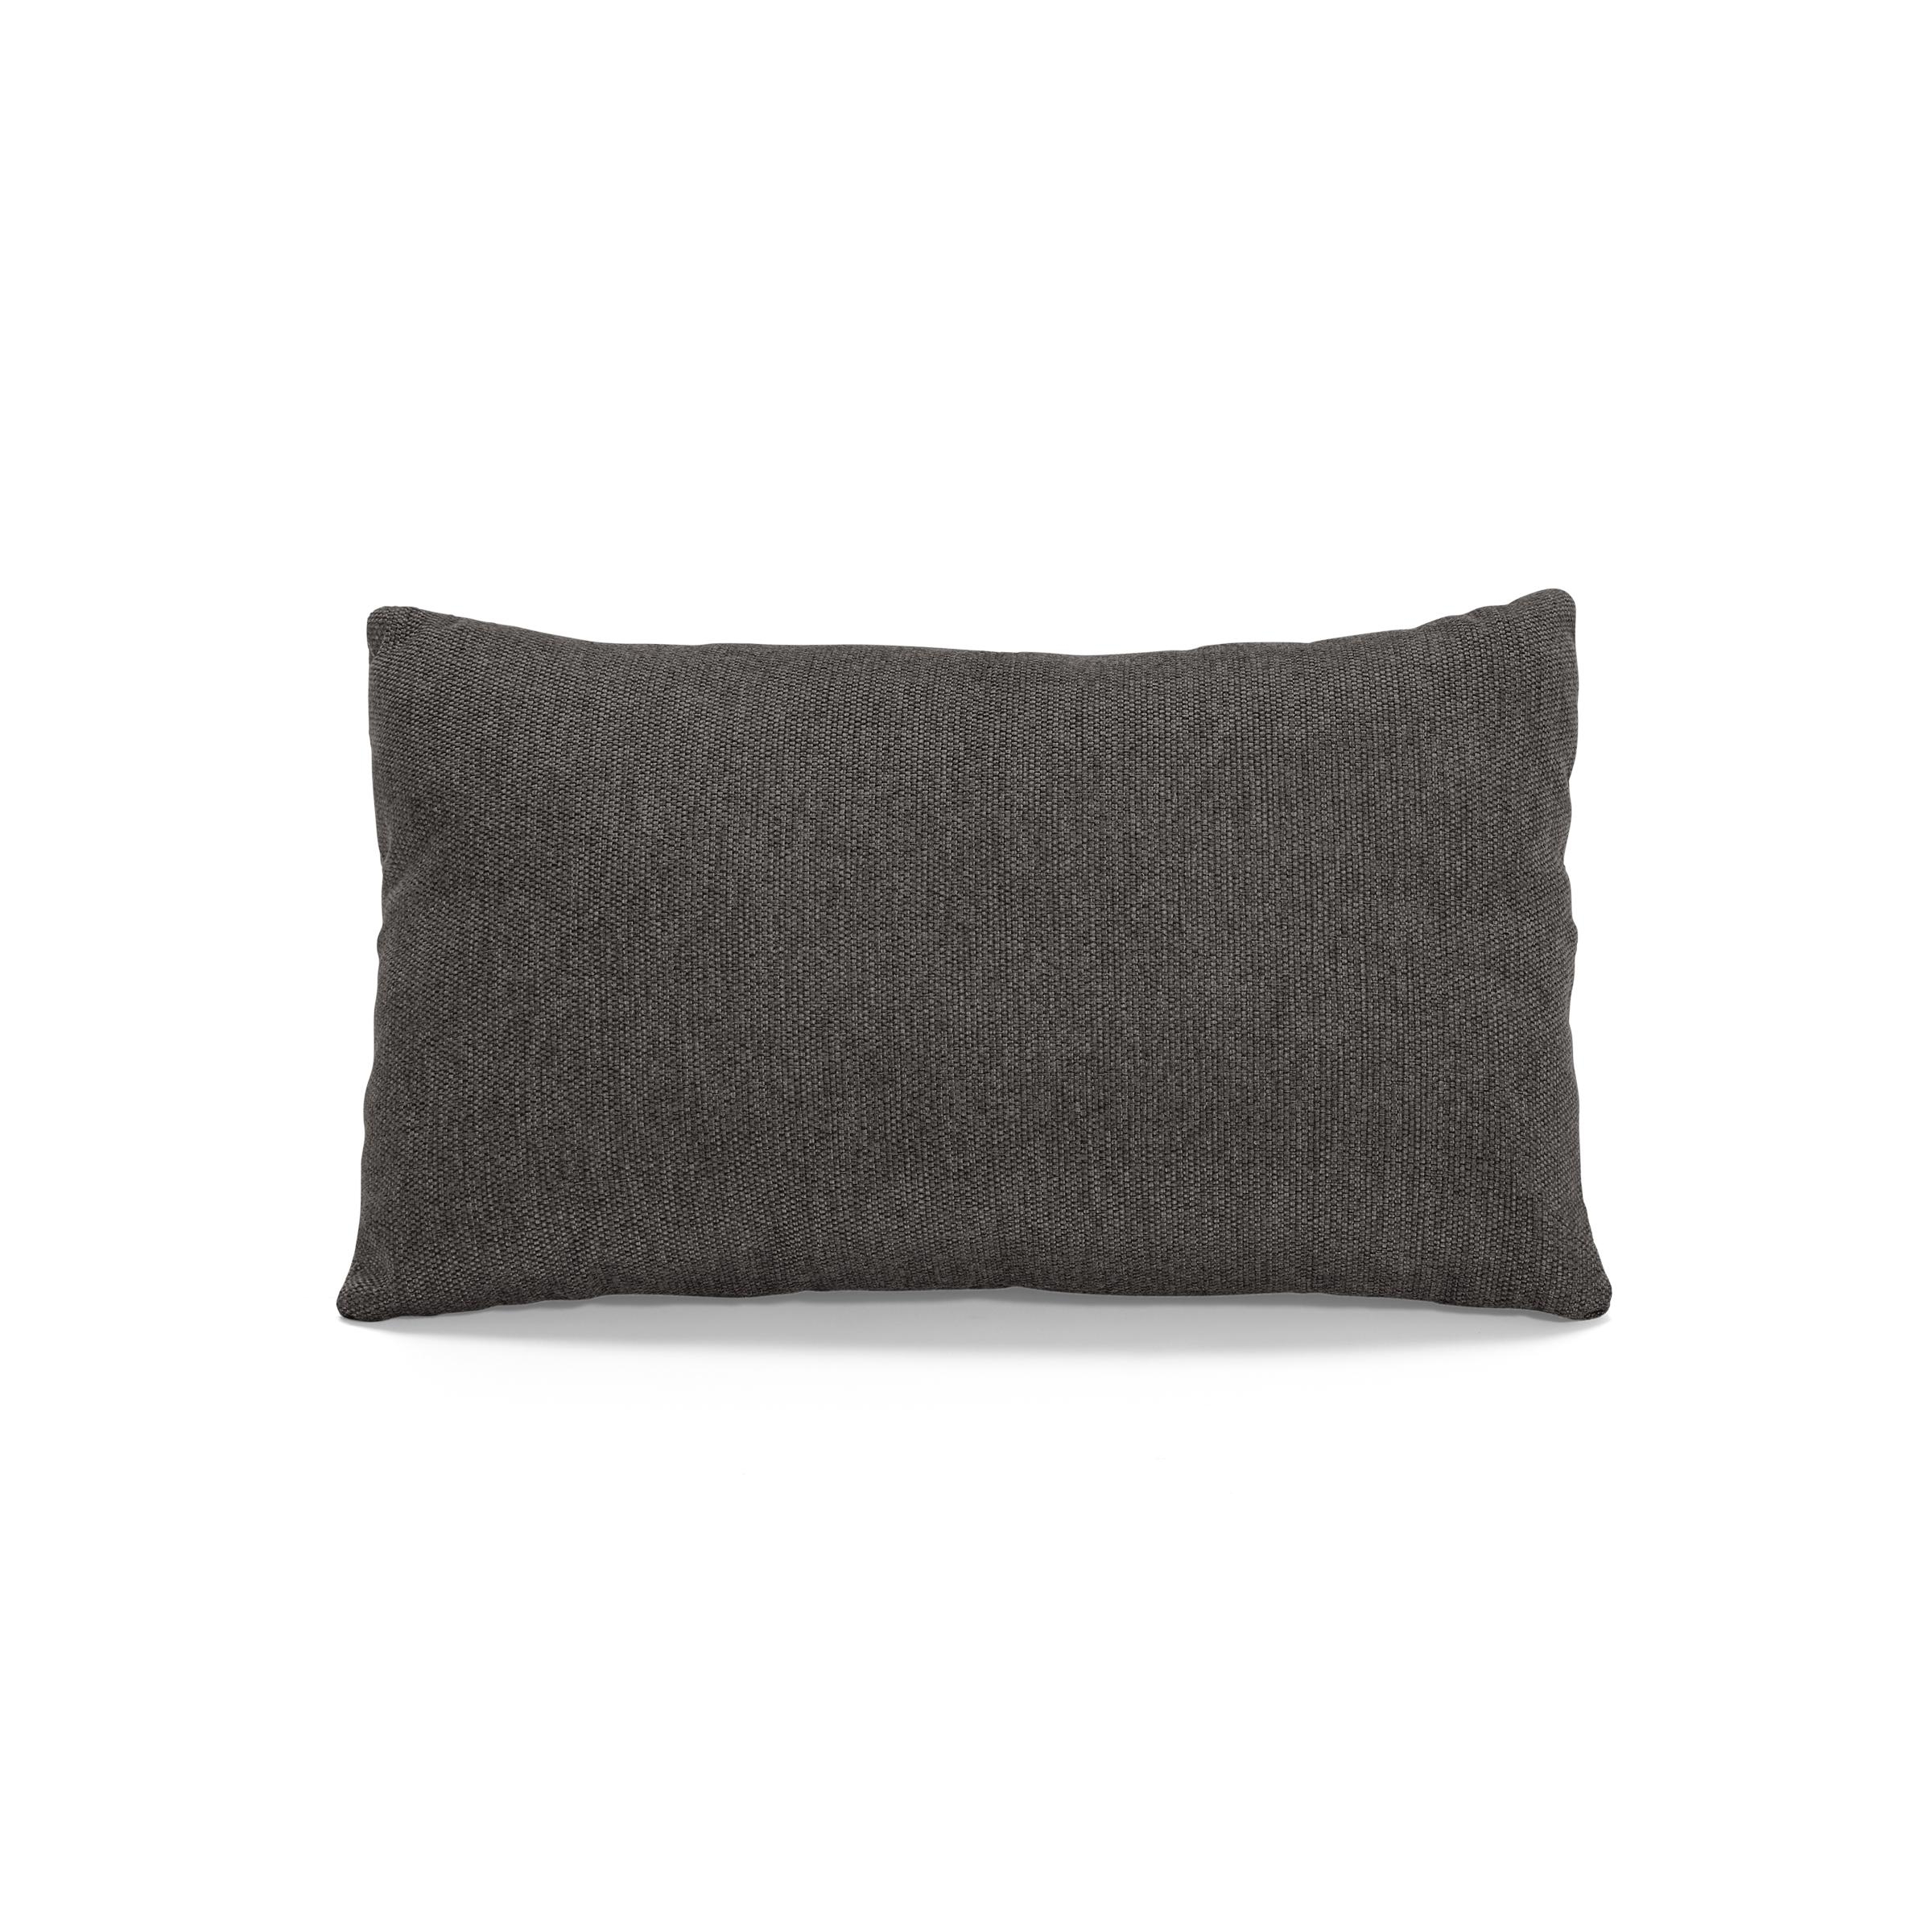 Nomad Lumbar Pillow in Charcoal - Image 0